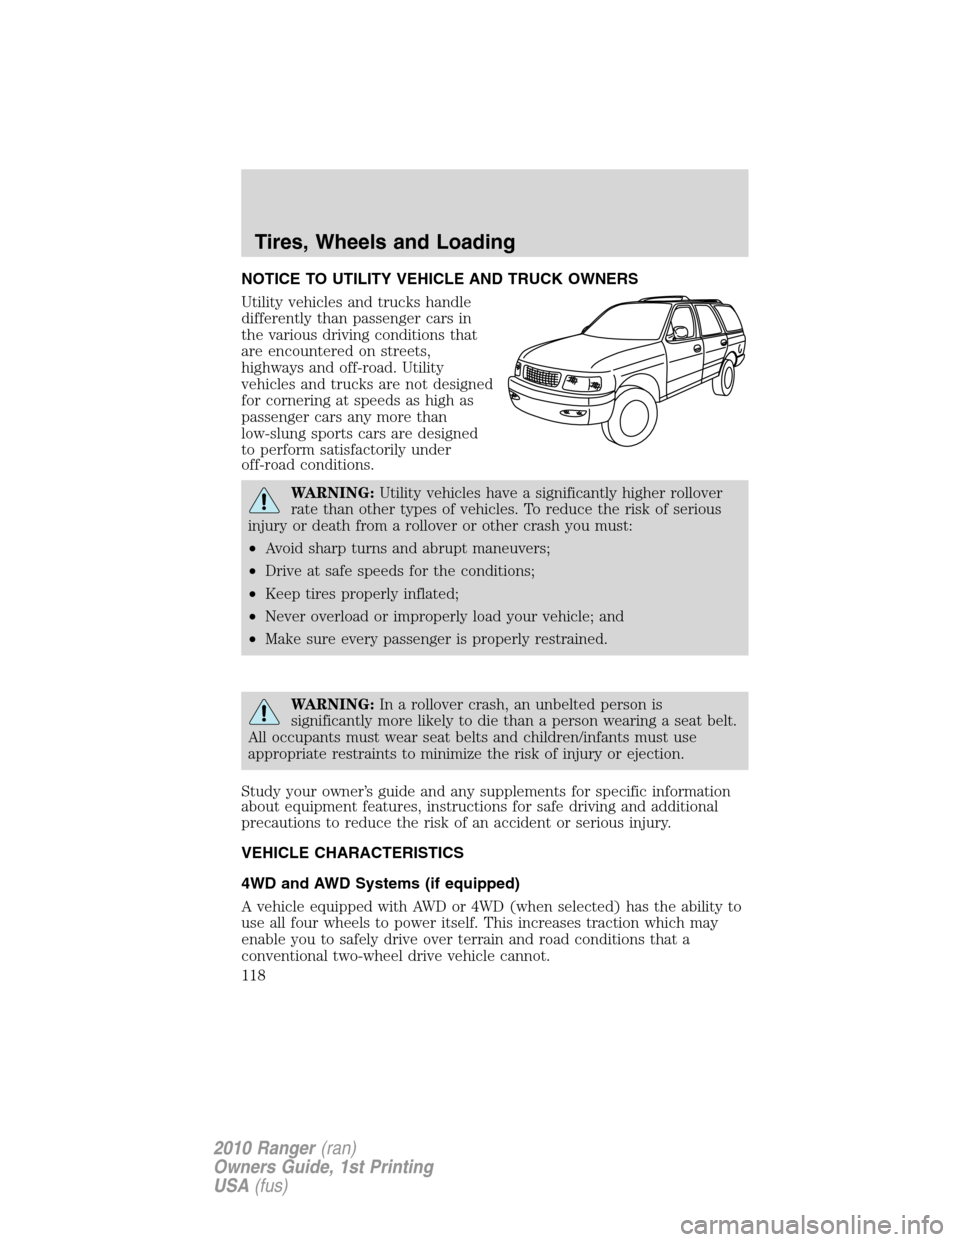 FORD RANGER 2010 2.G Owners Guide NOTICE TO UTILITY VEHICLE AND TRUCK OWNERS
Utility vehicles and trucks handle
differently than passenger cars in
the various driving conditions that
are encountered on streets,
highways and off-road. 